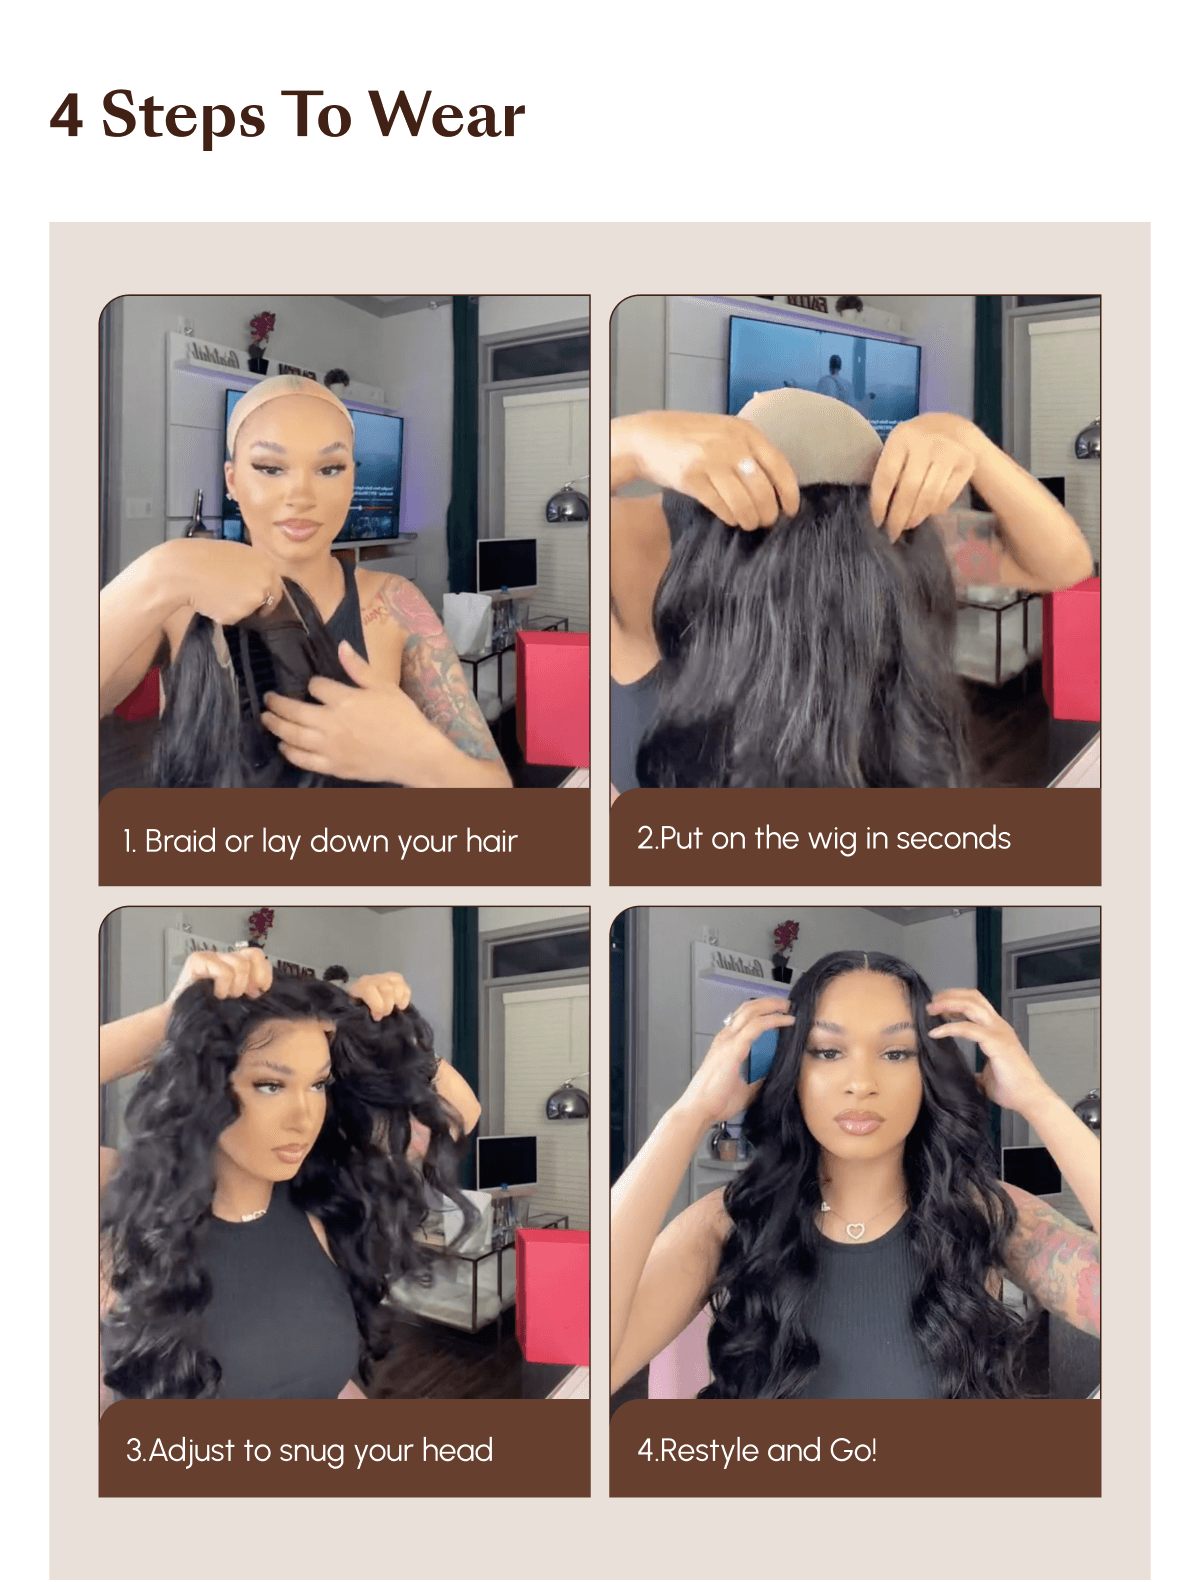 The Perfect Wig Kit to Install, Style☑️& Maintain Lace Wigs